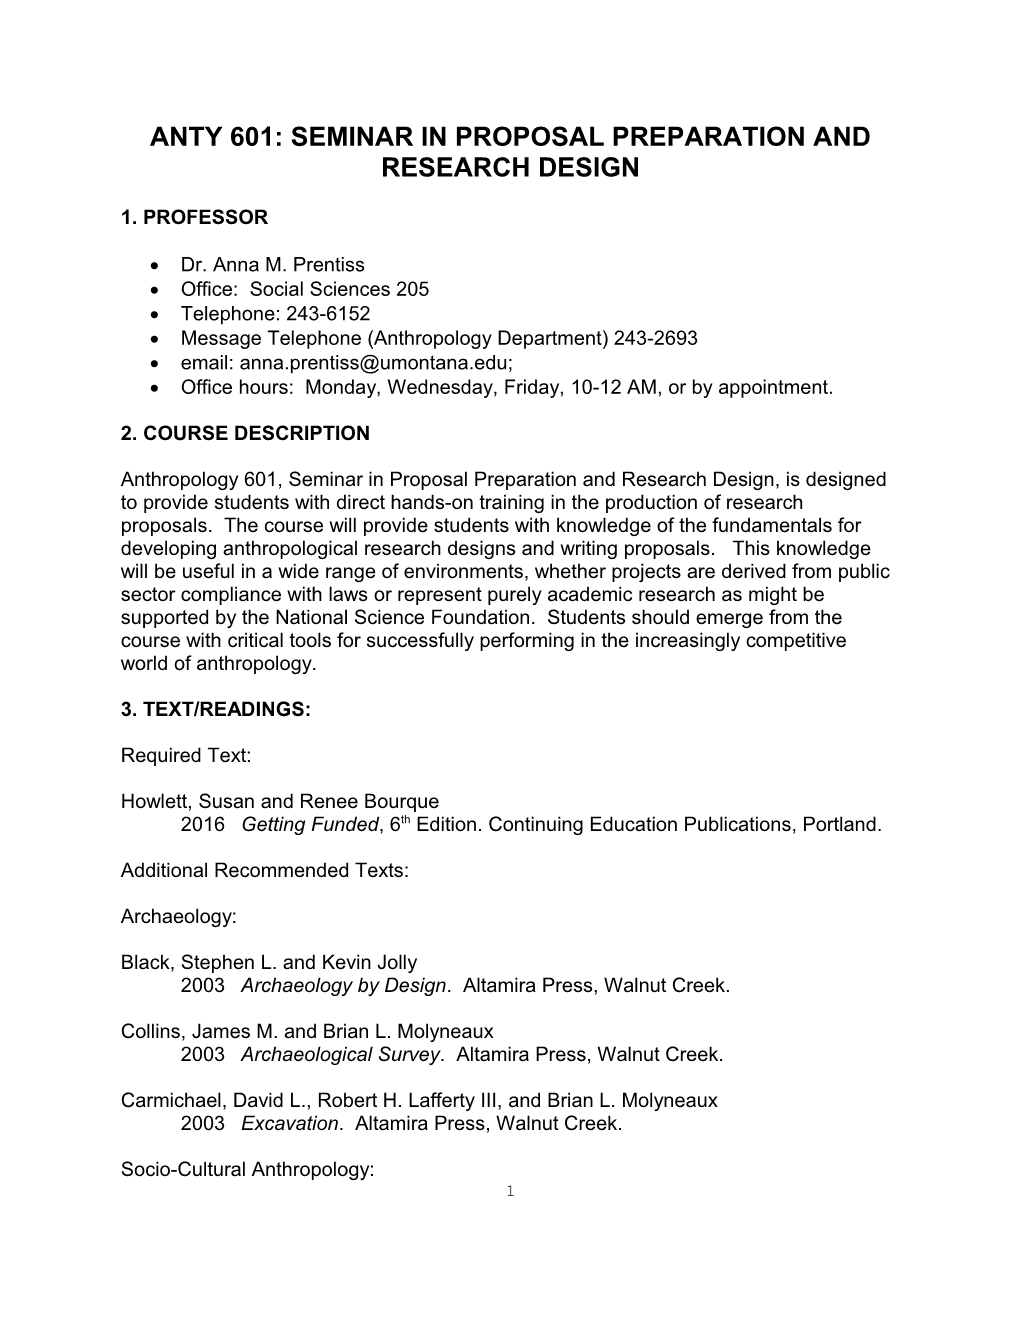 Anty 601: Seminar in Proposal Preparation and Research Design